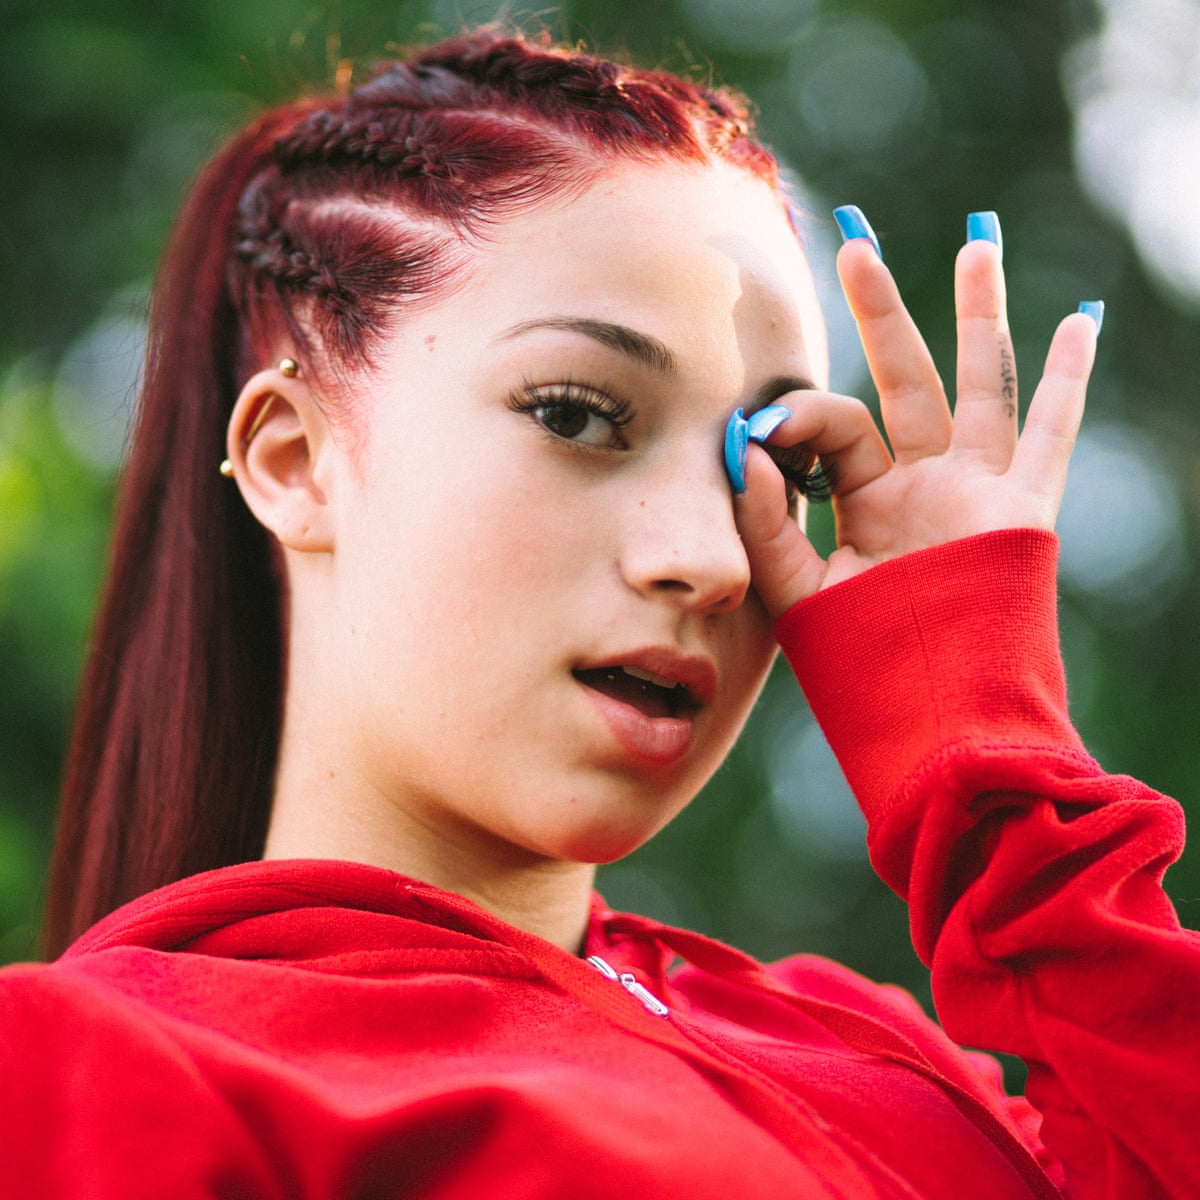 How to pronounce bhad bhabie